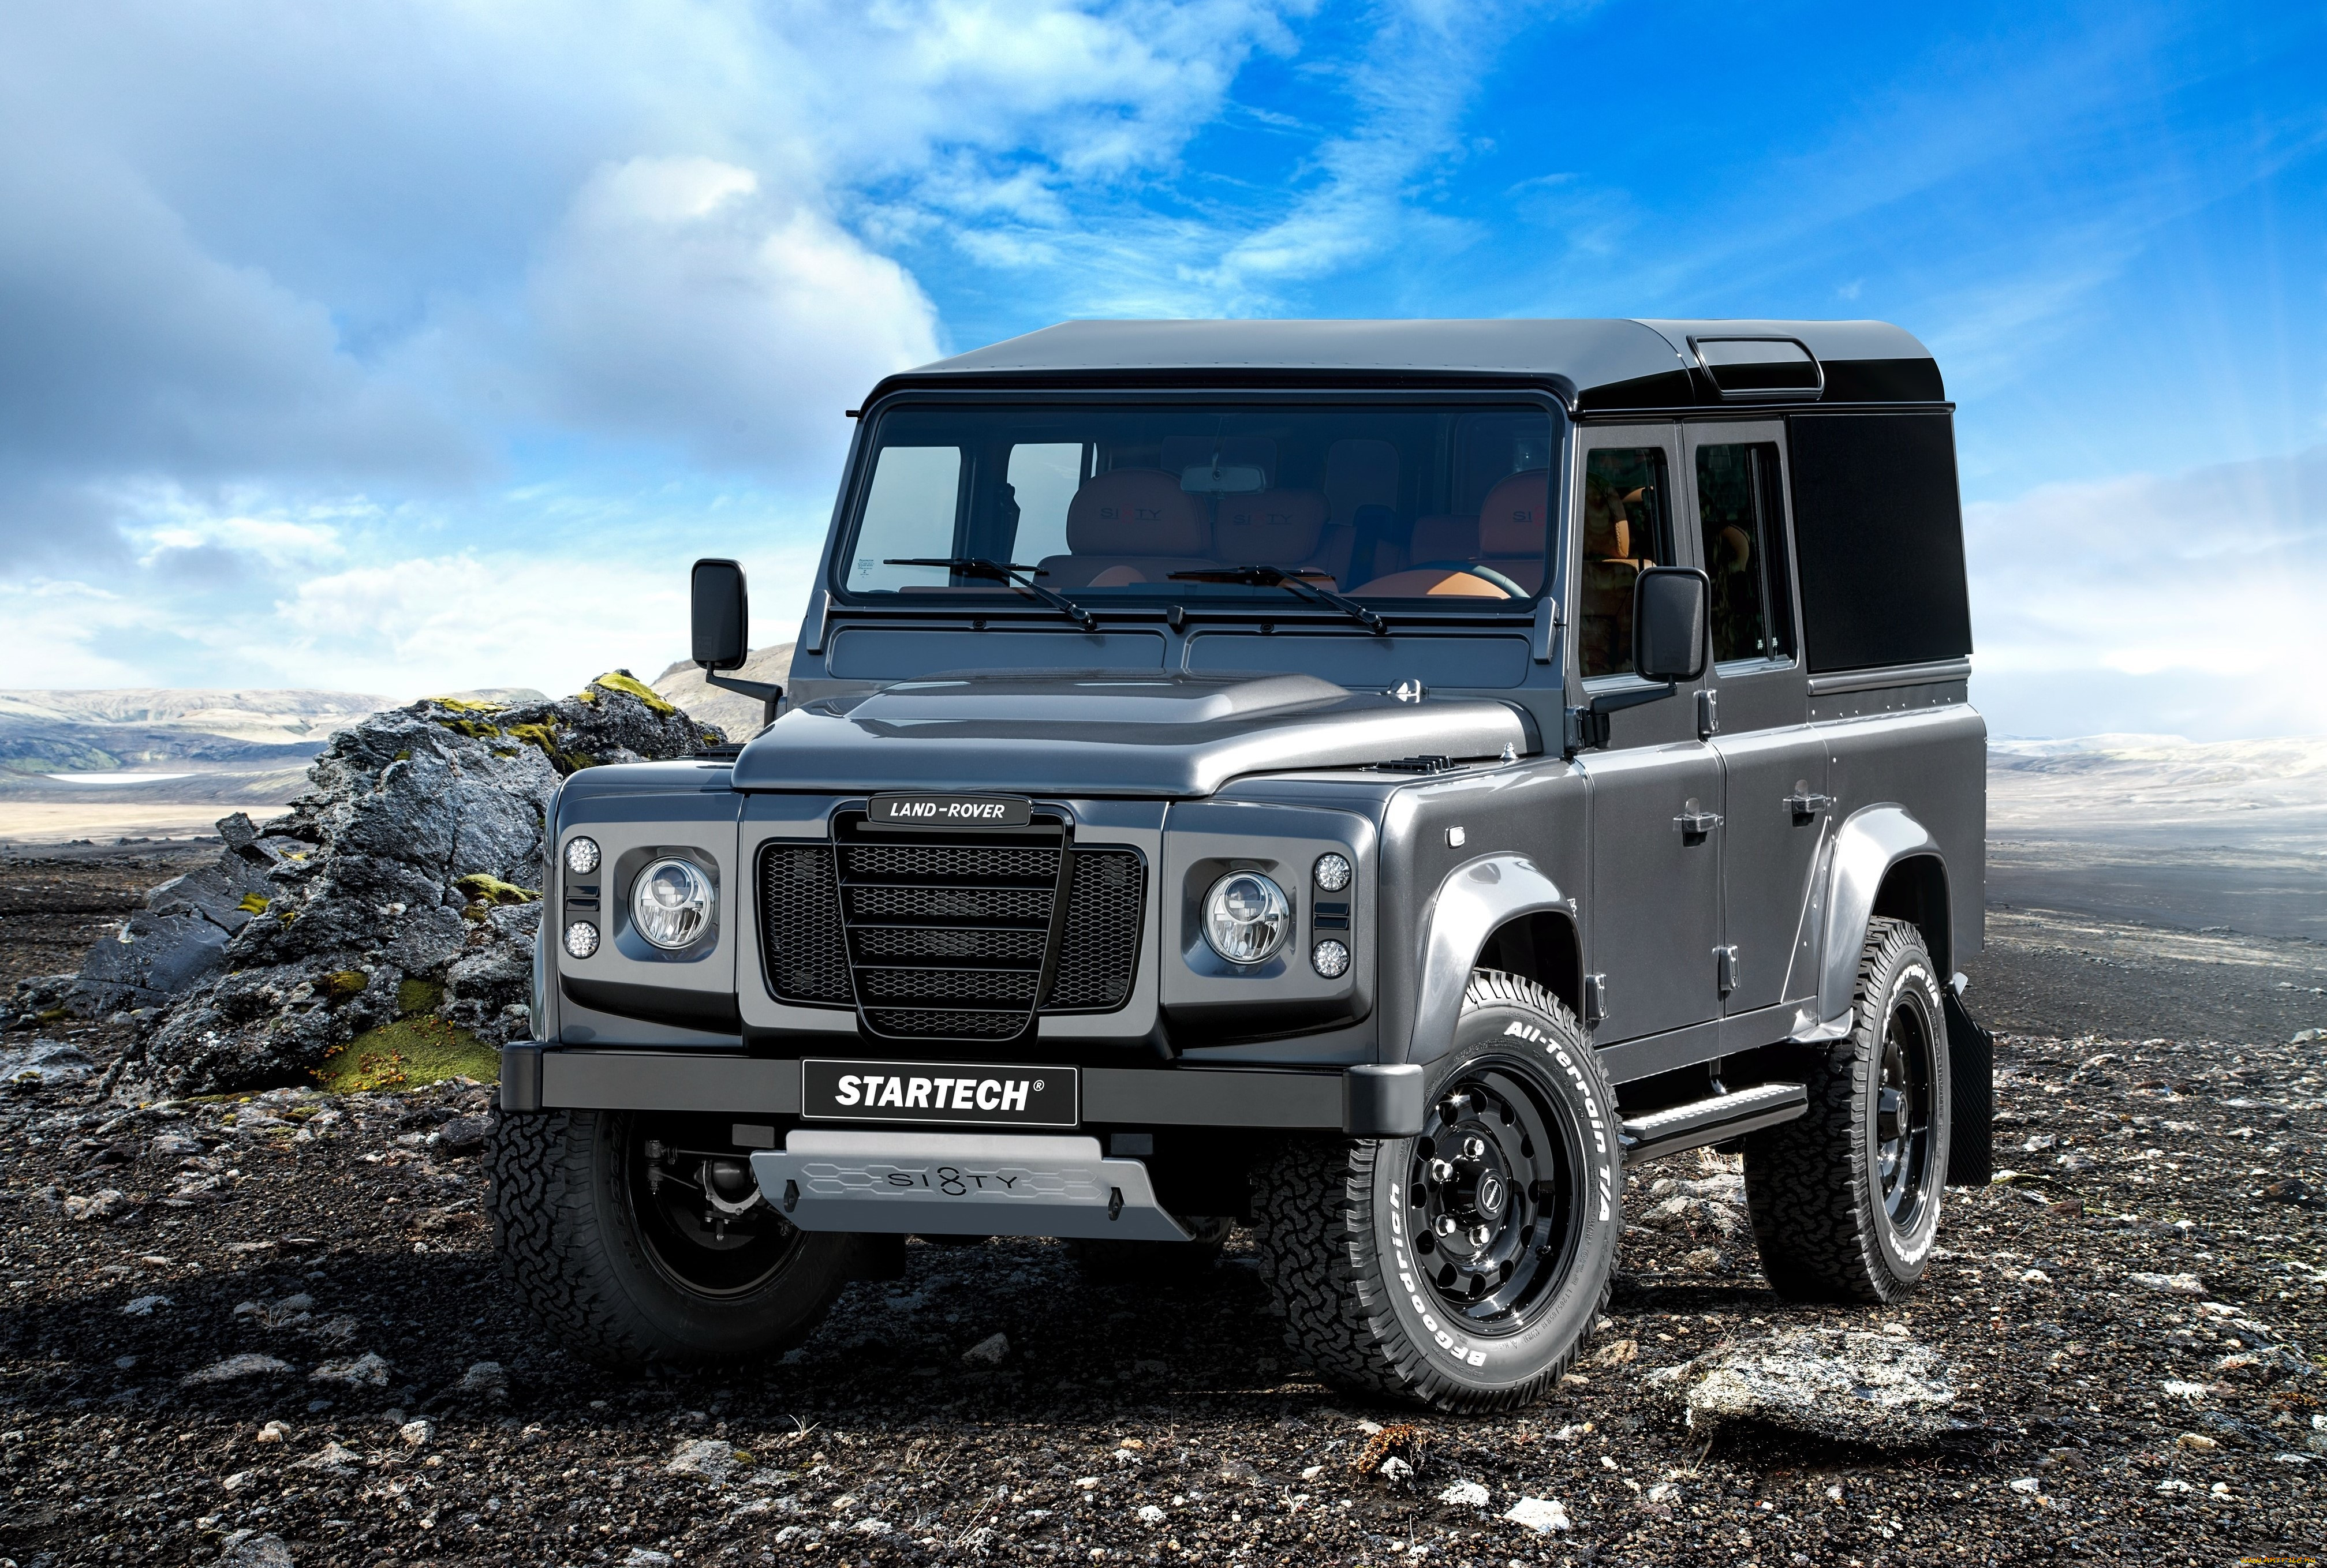 , land-rover, land, rover, startech, 2015, sixty8, defender, 110